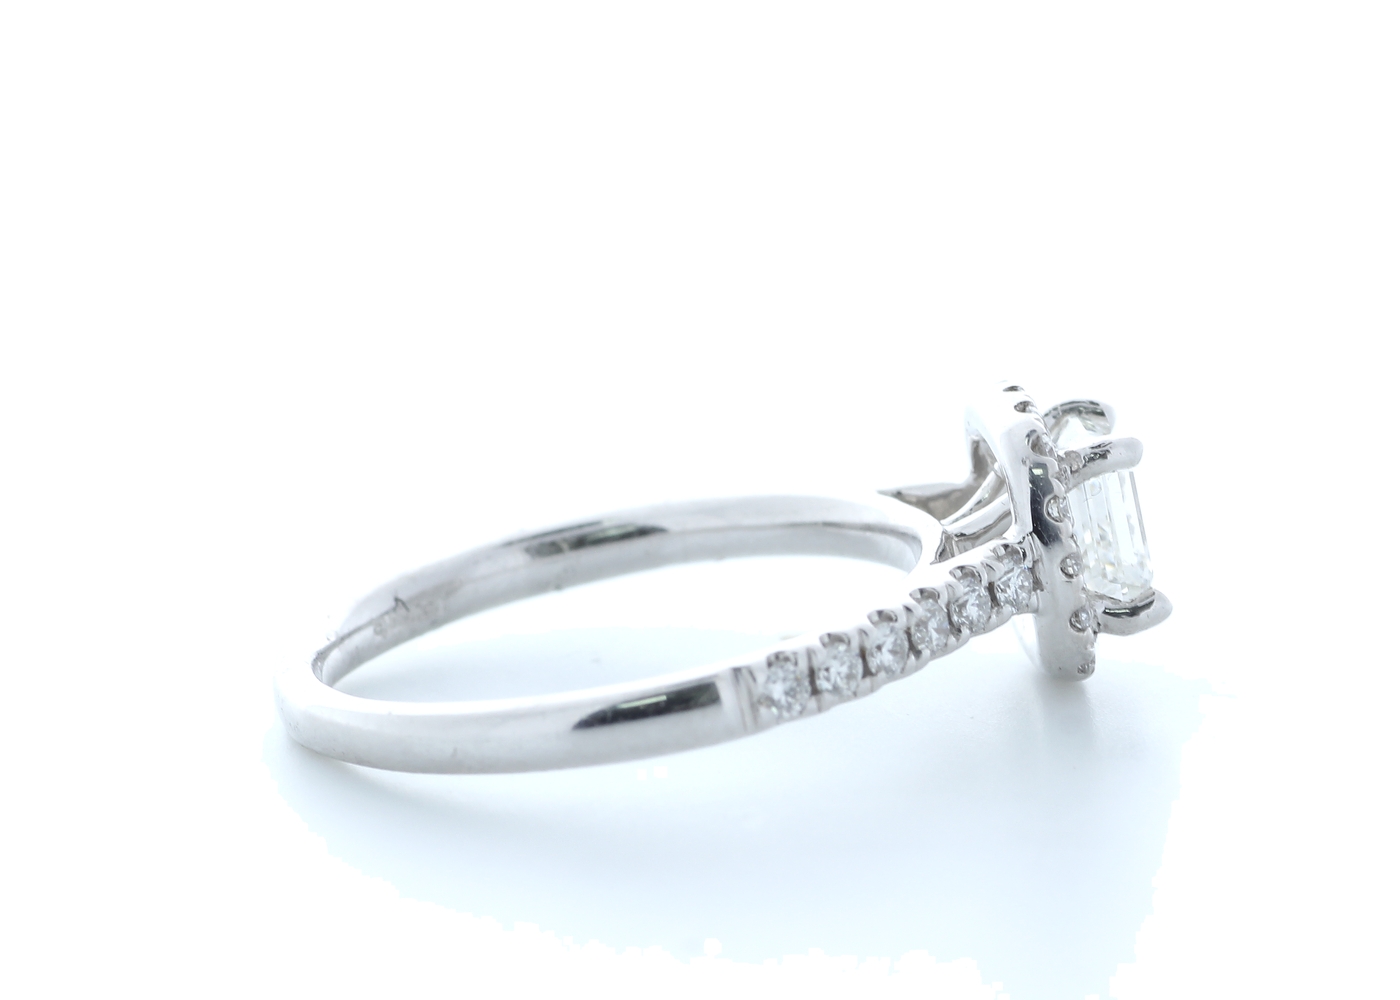 18ct White Gold Flawless Asscher Cut Diamond Ring 1.00 (0.71) Carats - Image 4 of 5